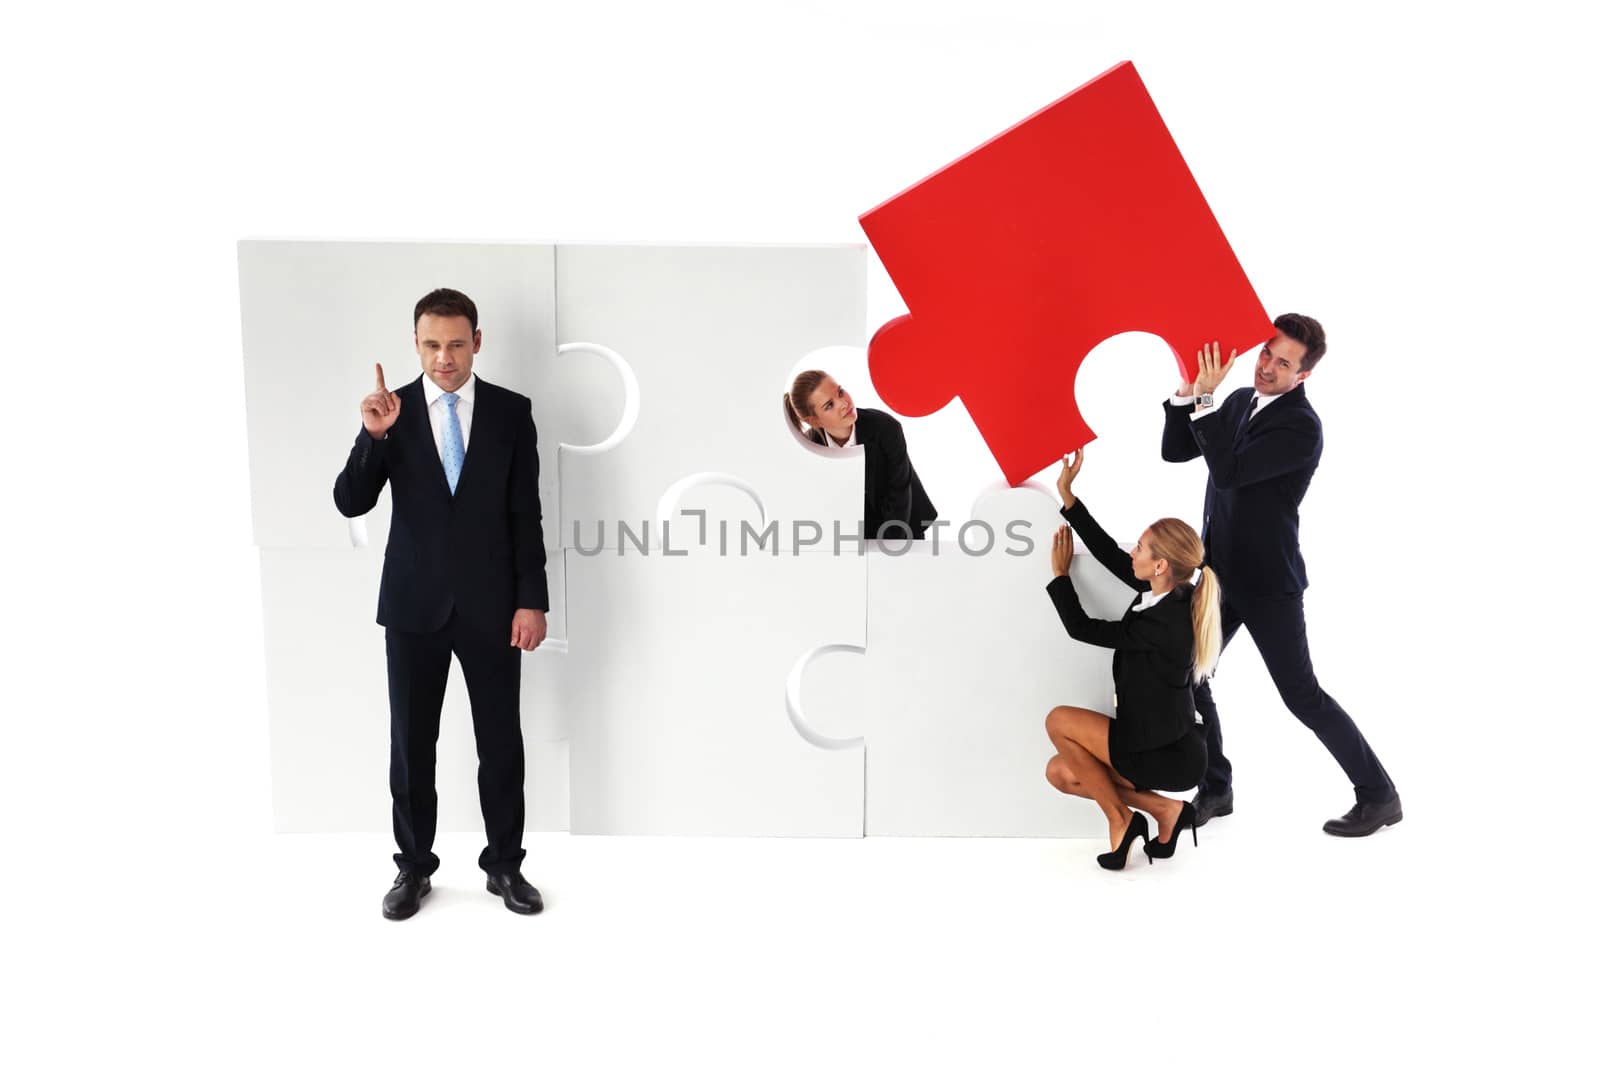 Business team assembling big puzzle and smart businessman standing aside pinting finger up isolated on white background